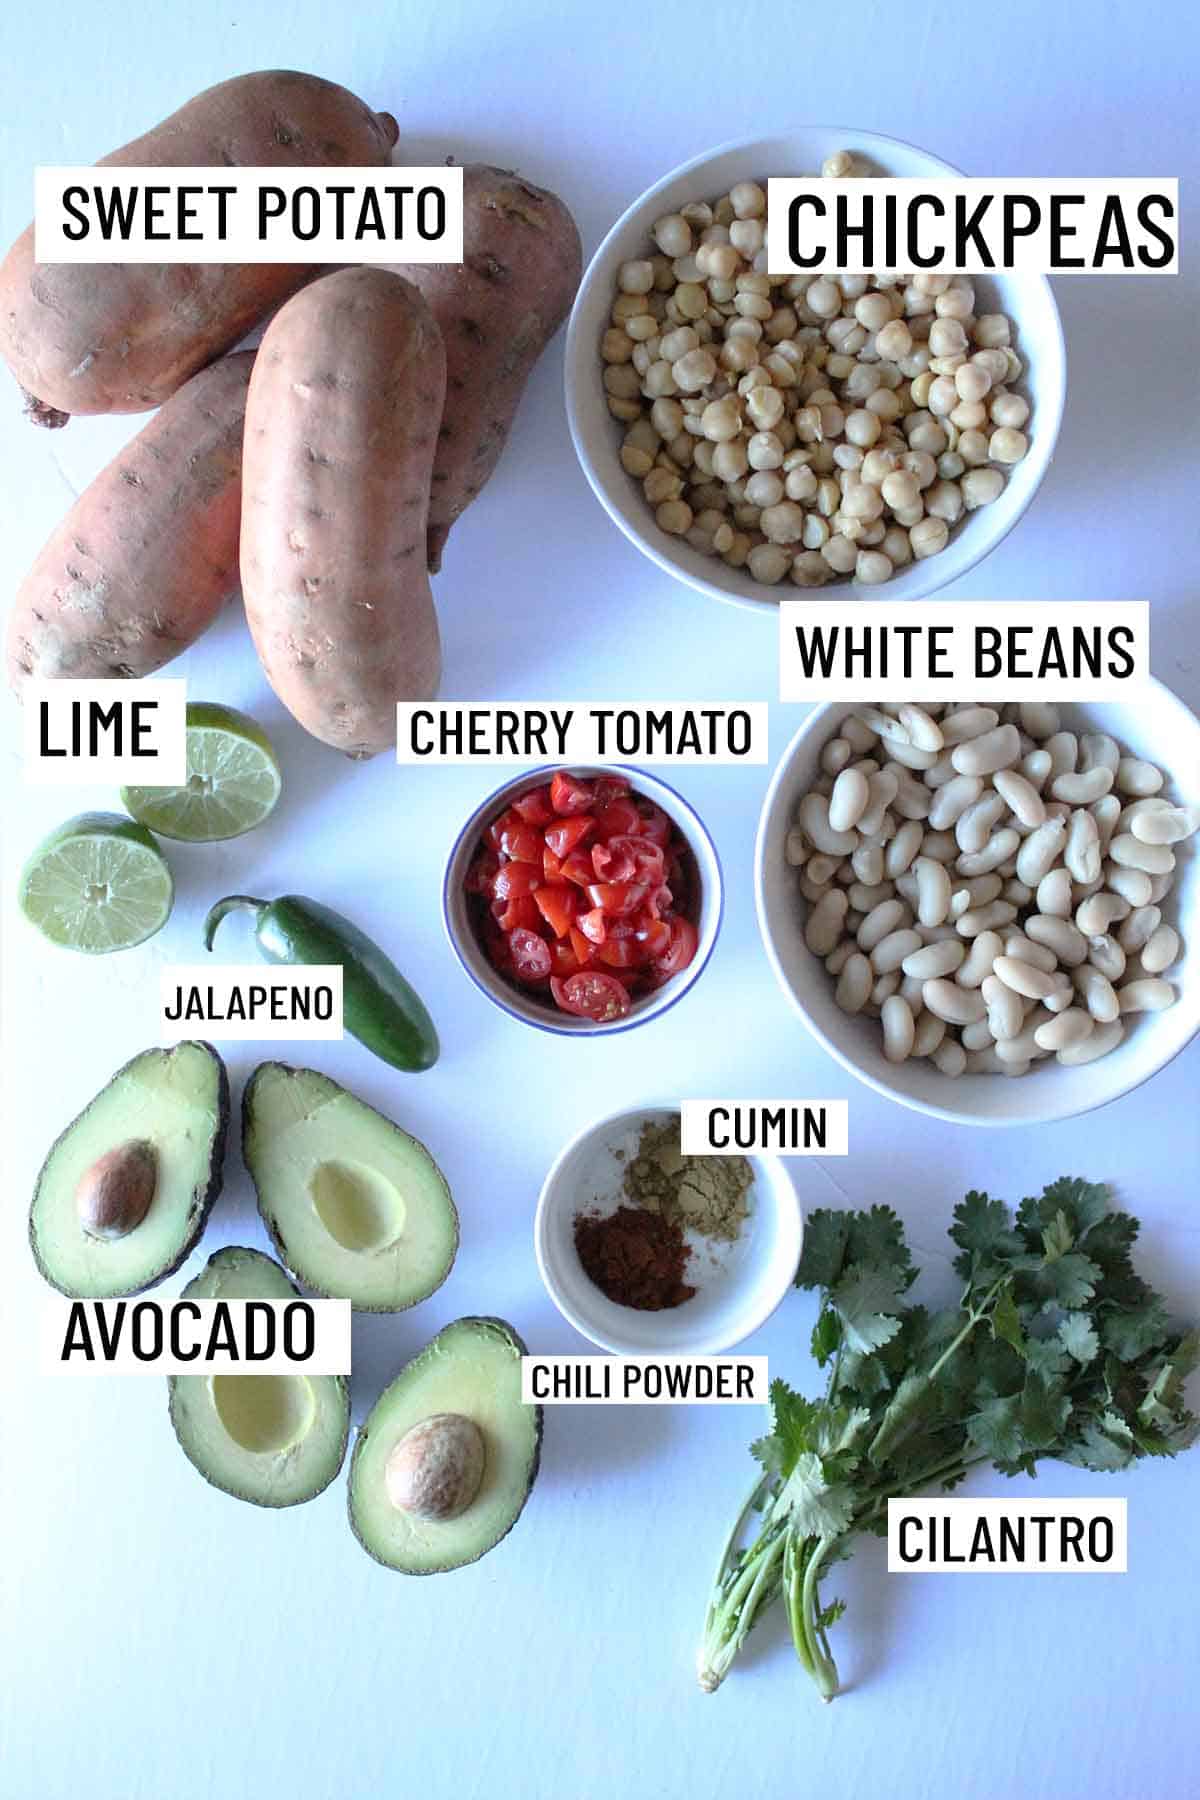 Birds eye view or portioned ingredients for guacamole stuffed sweet potatoes including sweet potato, avocado, cilantro, chili powder, cumin, white beans, cherry tomato, chickpeas, lime, and cilantro. 